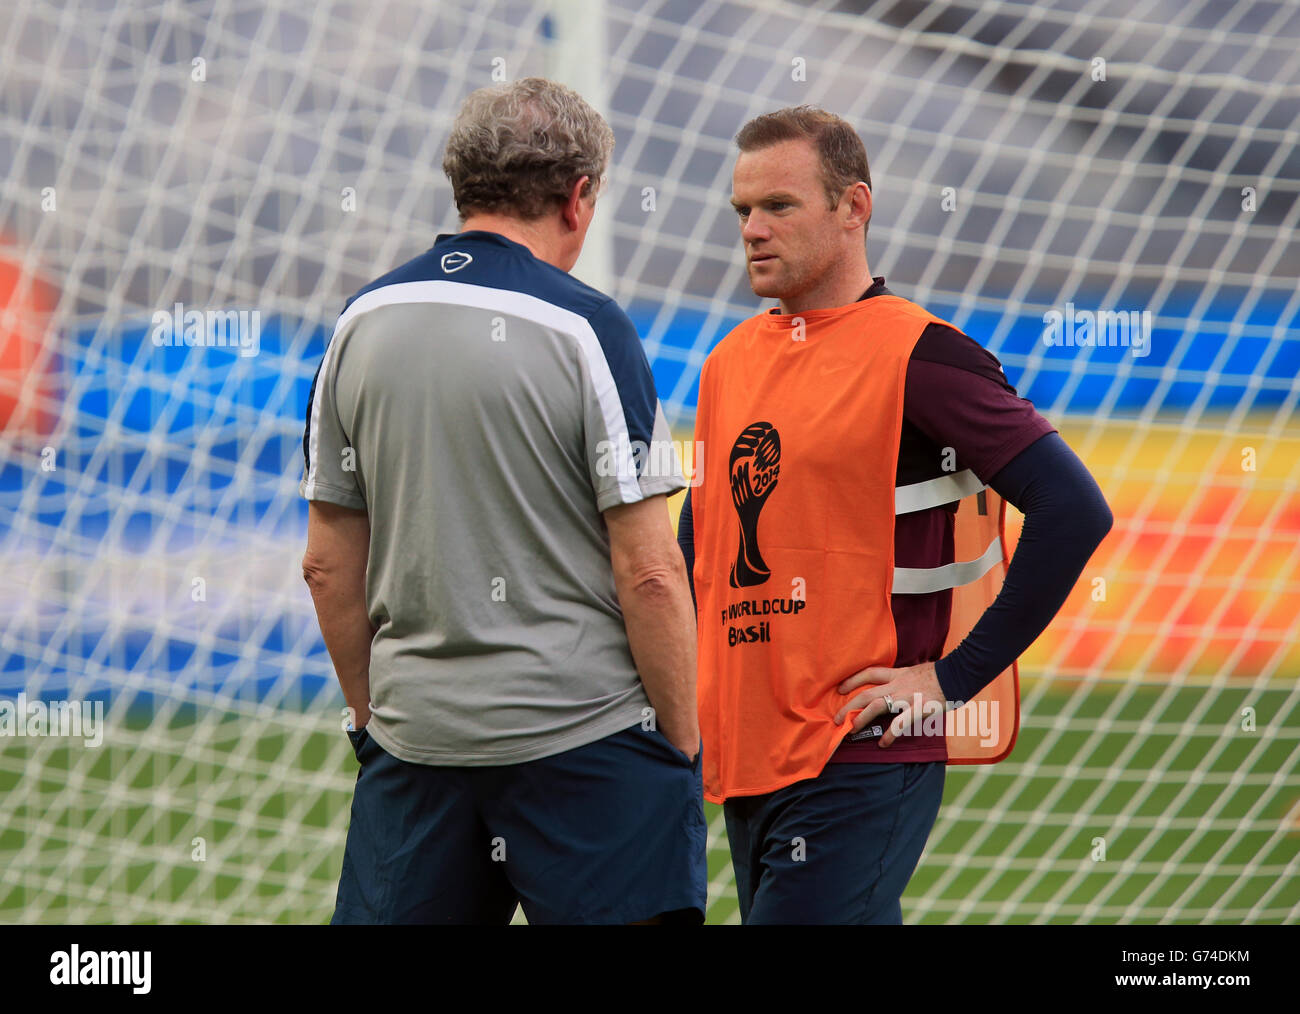 Soccer - FIFA World Cup 2014 - Group D - Costa Rica v England - Day Three - England Training and Press Conference - Estadio M.... England manager Roy Hodgoson chats with Wayne Rooney during a training session at the Estadio Mineirao, Belo Horizonte, Brazil. Stock Photo